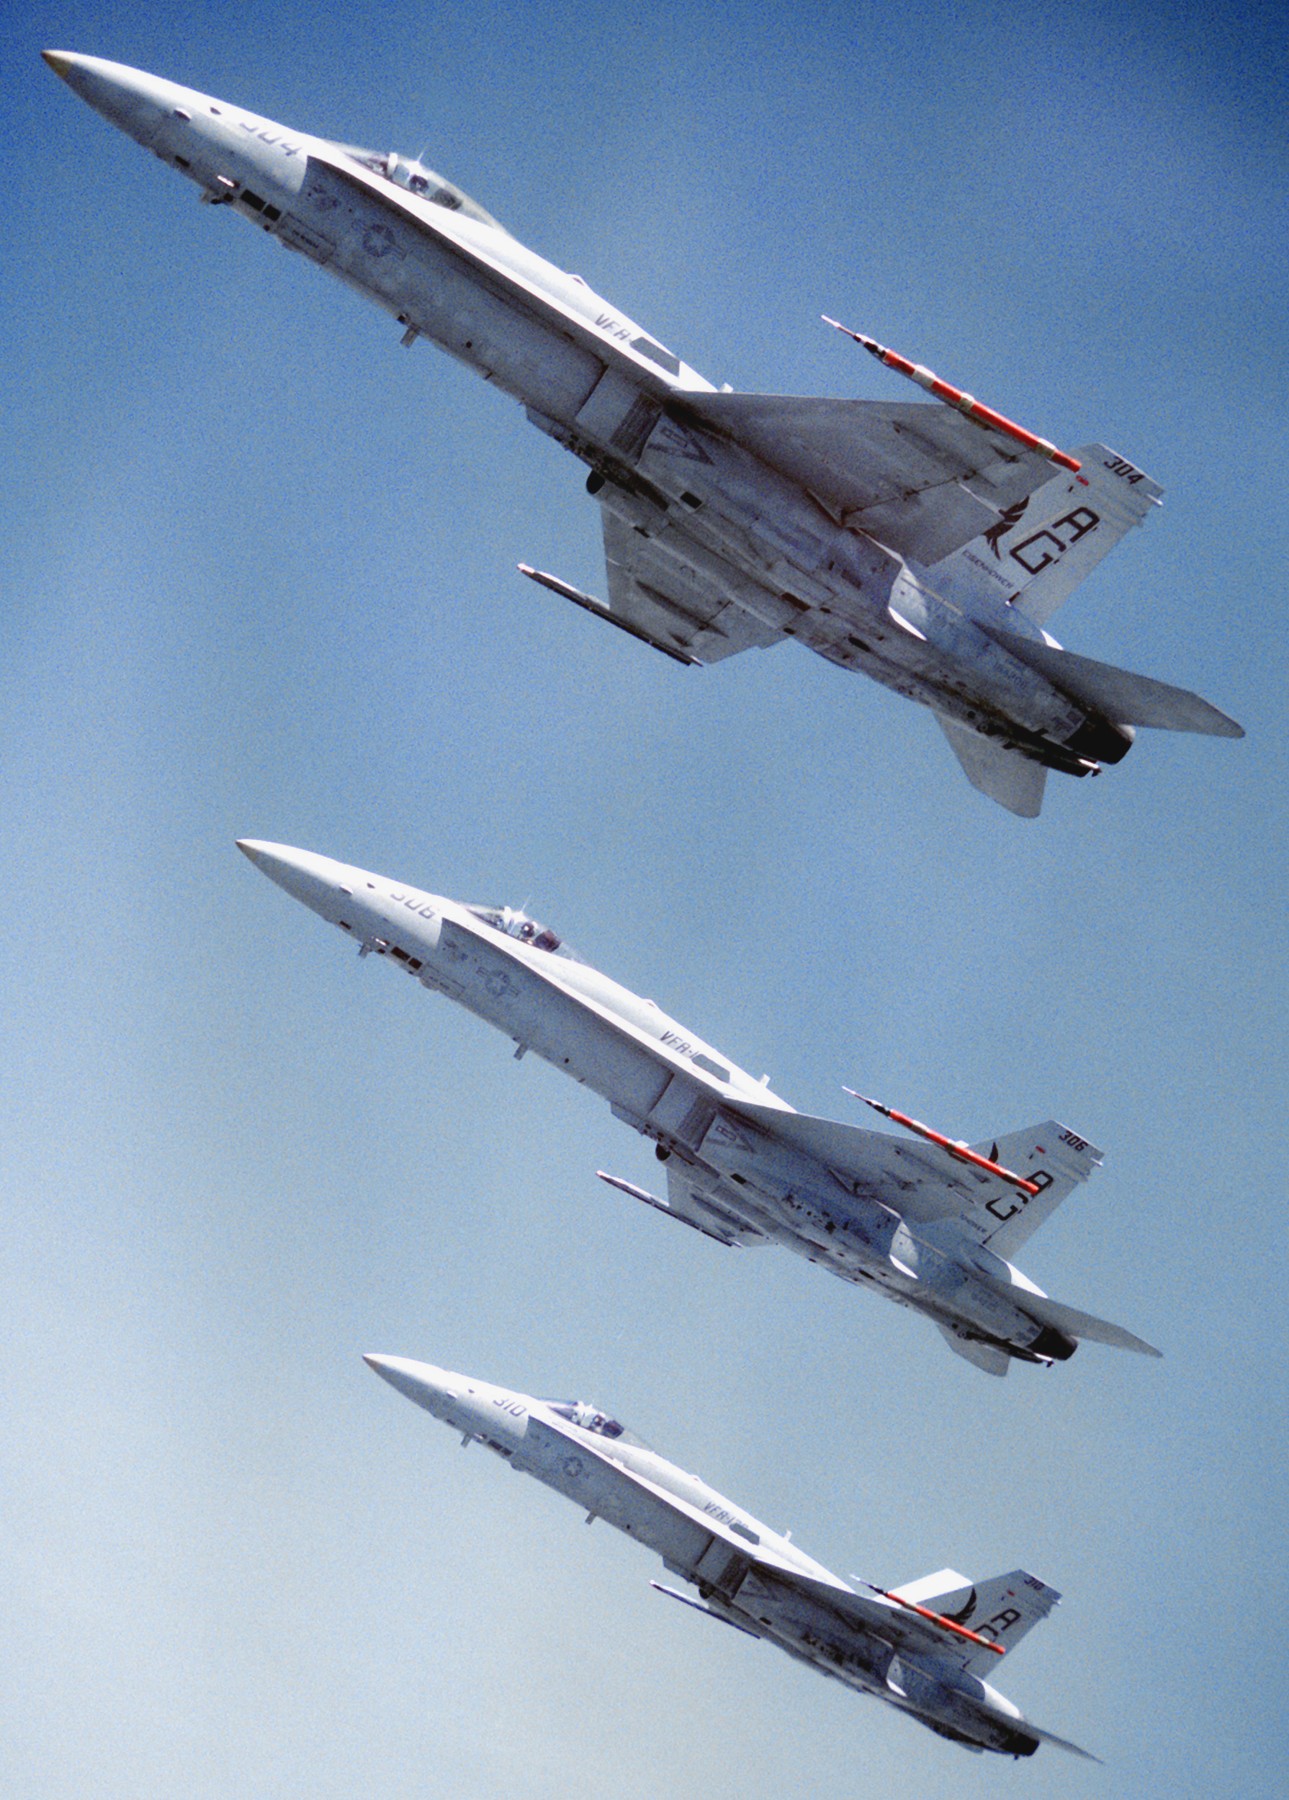 vfa-136 knighthawks strike fighter squadron f/a-18c hornet 1992 91 cvw-7 carrier air wing